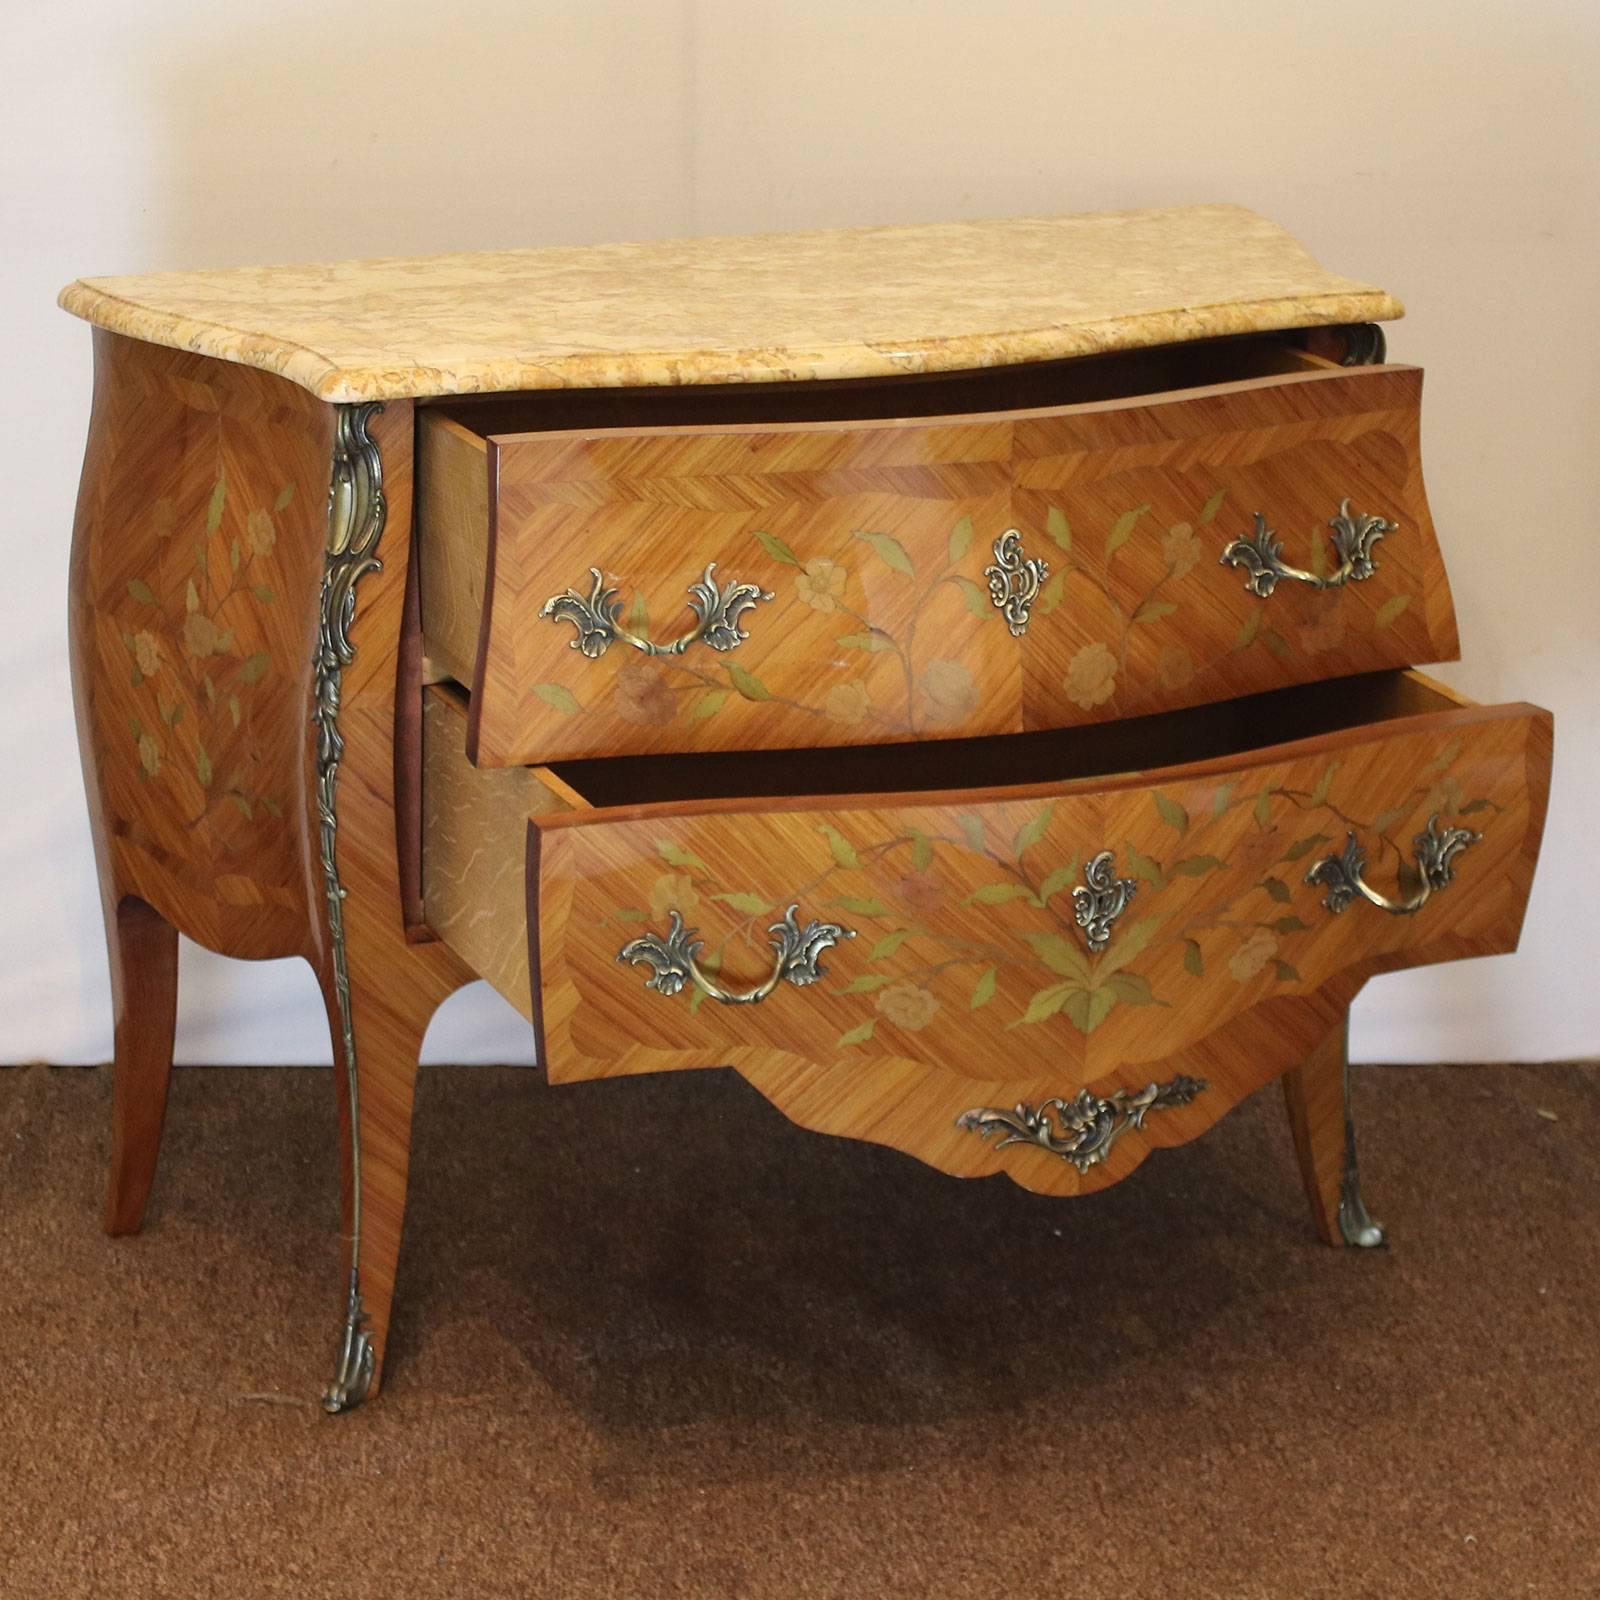 Decorative bombe commode with superb fruitwood inlay work and ormolu decoration. This commode has beautifully shaped legs, colored marble-top and two deep working drawers.